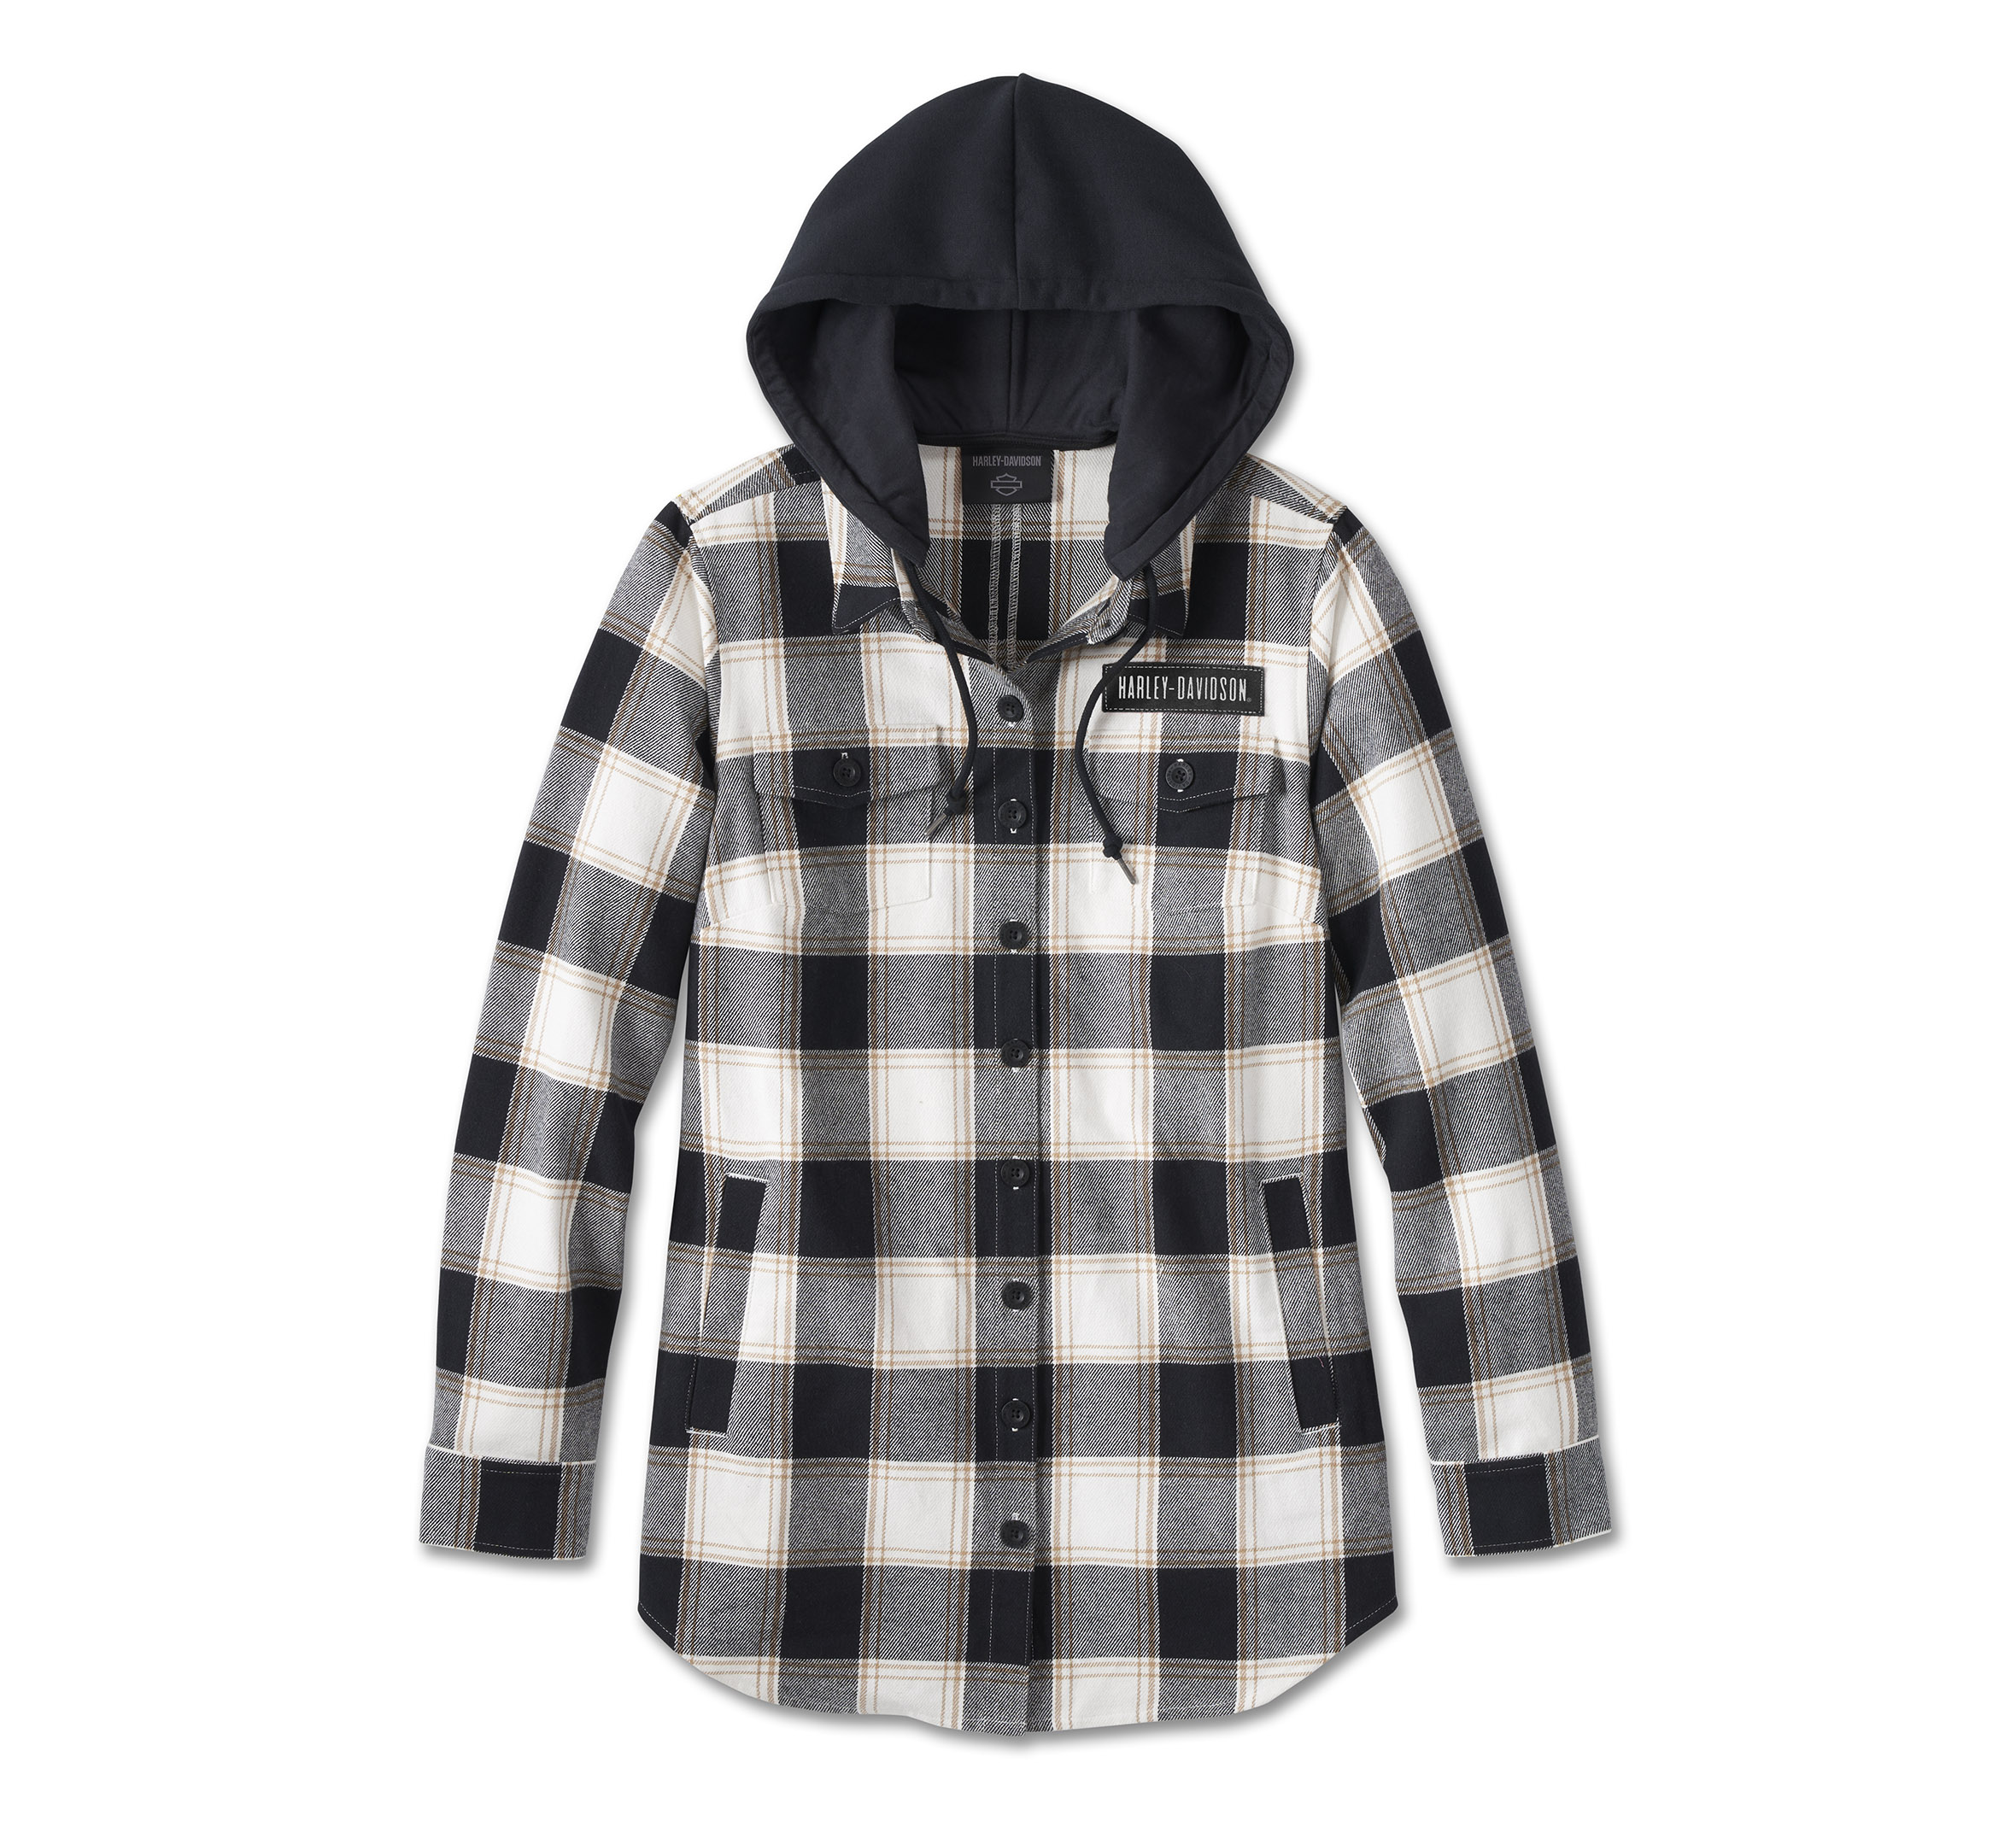 Women's Thrill Seeker Tunic with Removable Hood - YD Plaid - Black ...